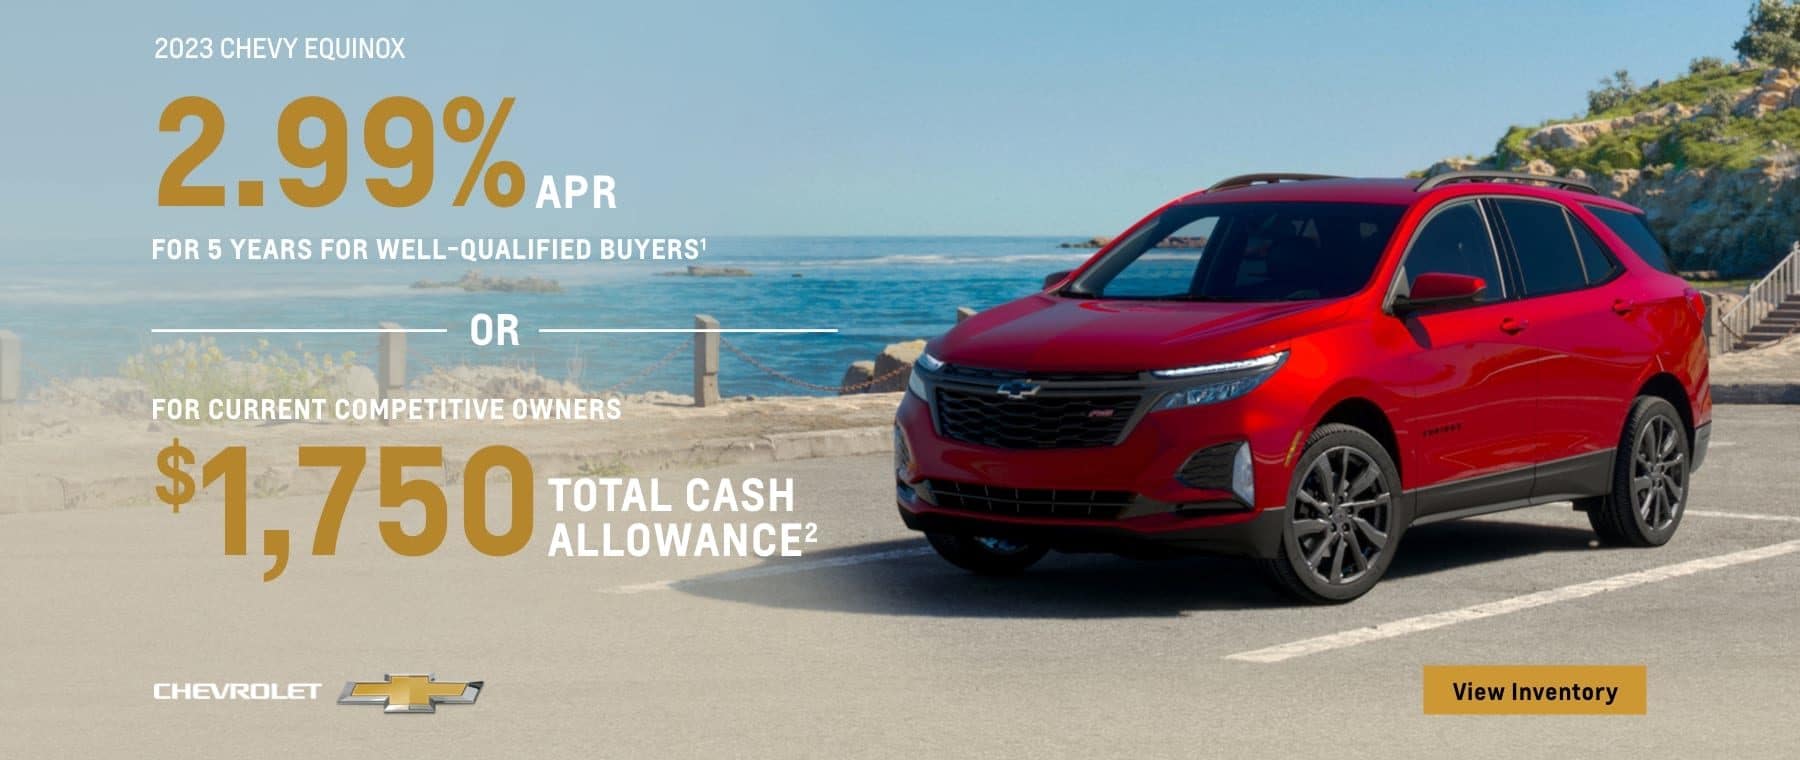 2023 Chevy Equinox. 2.99% APR for 5 years for well-qualified buyers . Or, For current competitive owners $1,750 total cash allowance.